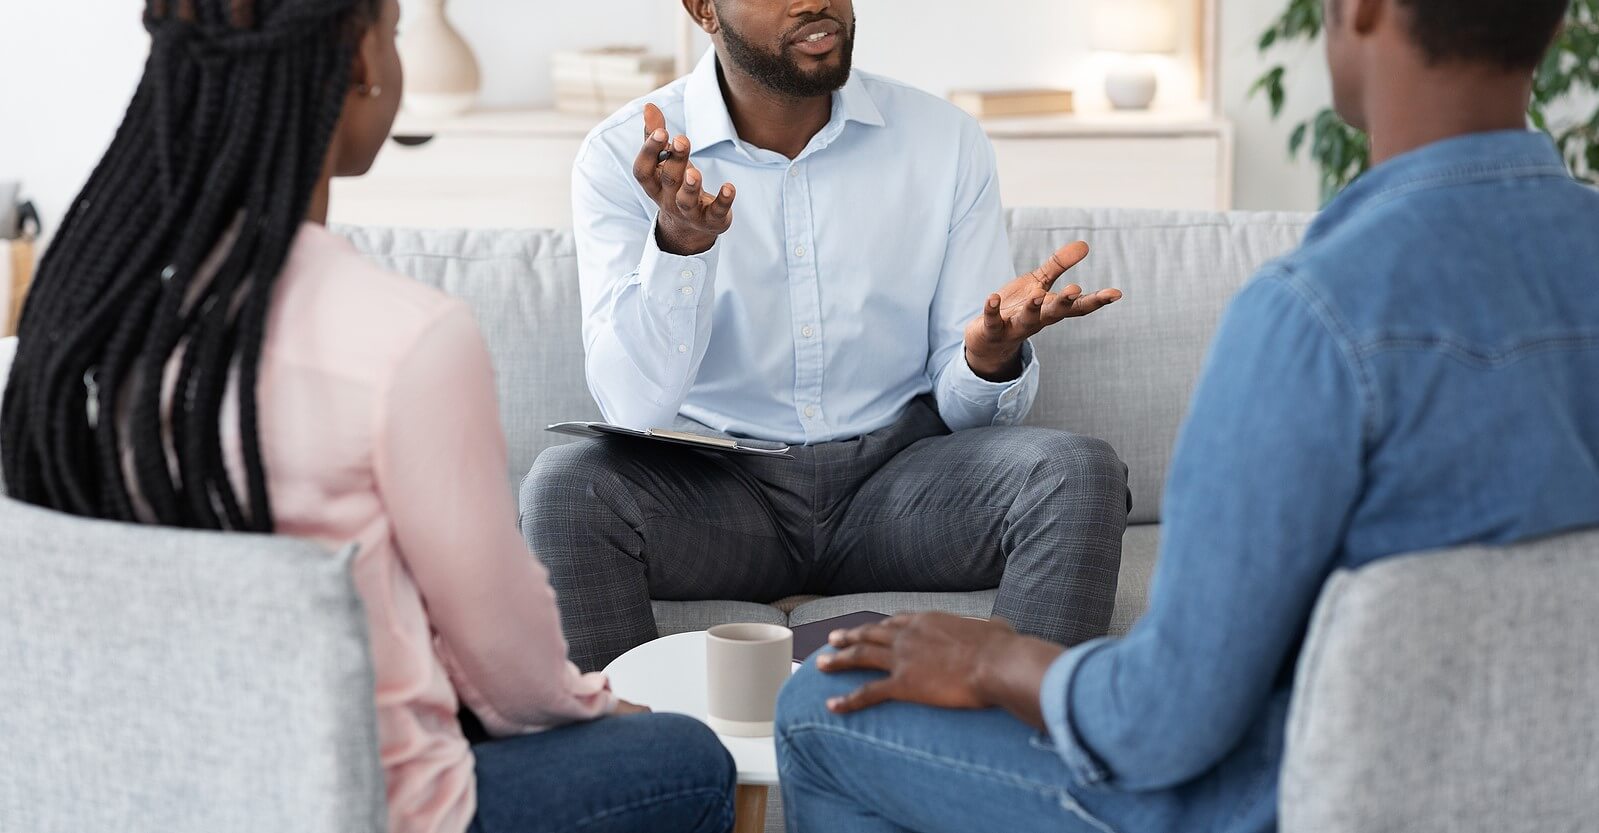 A person talks to a man and woman sitting across from them while gesticulating with their hands. learn how a family theapist in Branchburg, NJ can offer parenting help. Search for therapy branchburg, nj to get in contact with a group therapist in Scotch Plains, NJ today.